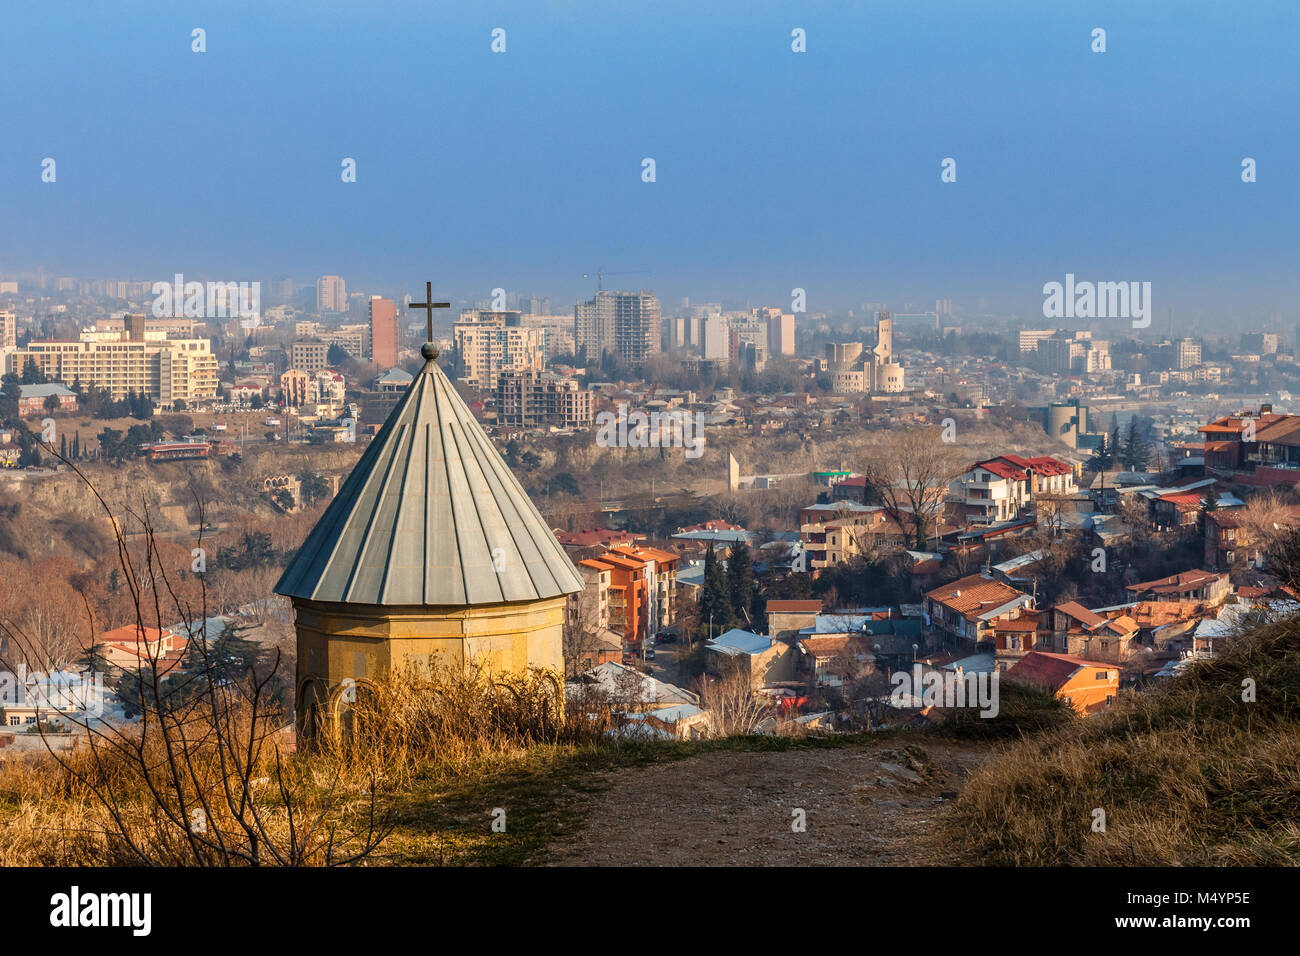 Old church dome with the cross and growing residential area with modern buildings, Tbilisi, Georgia Stock Photo